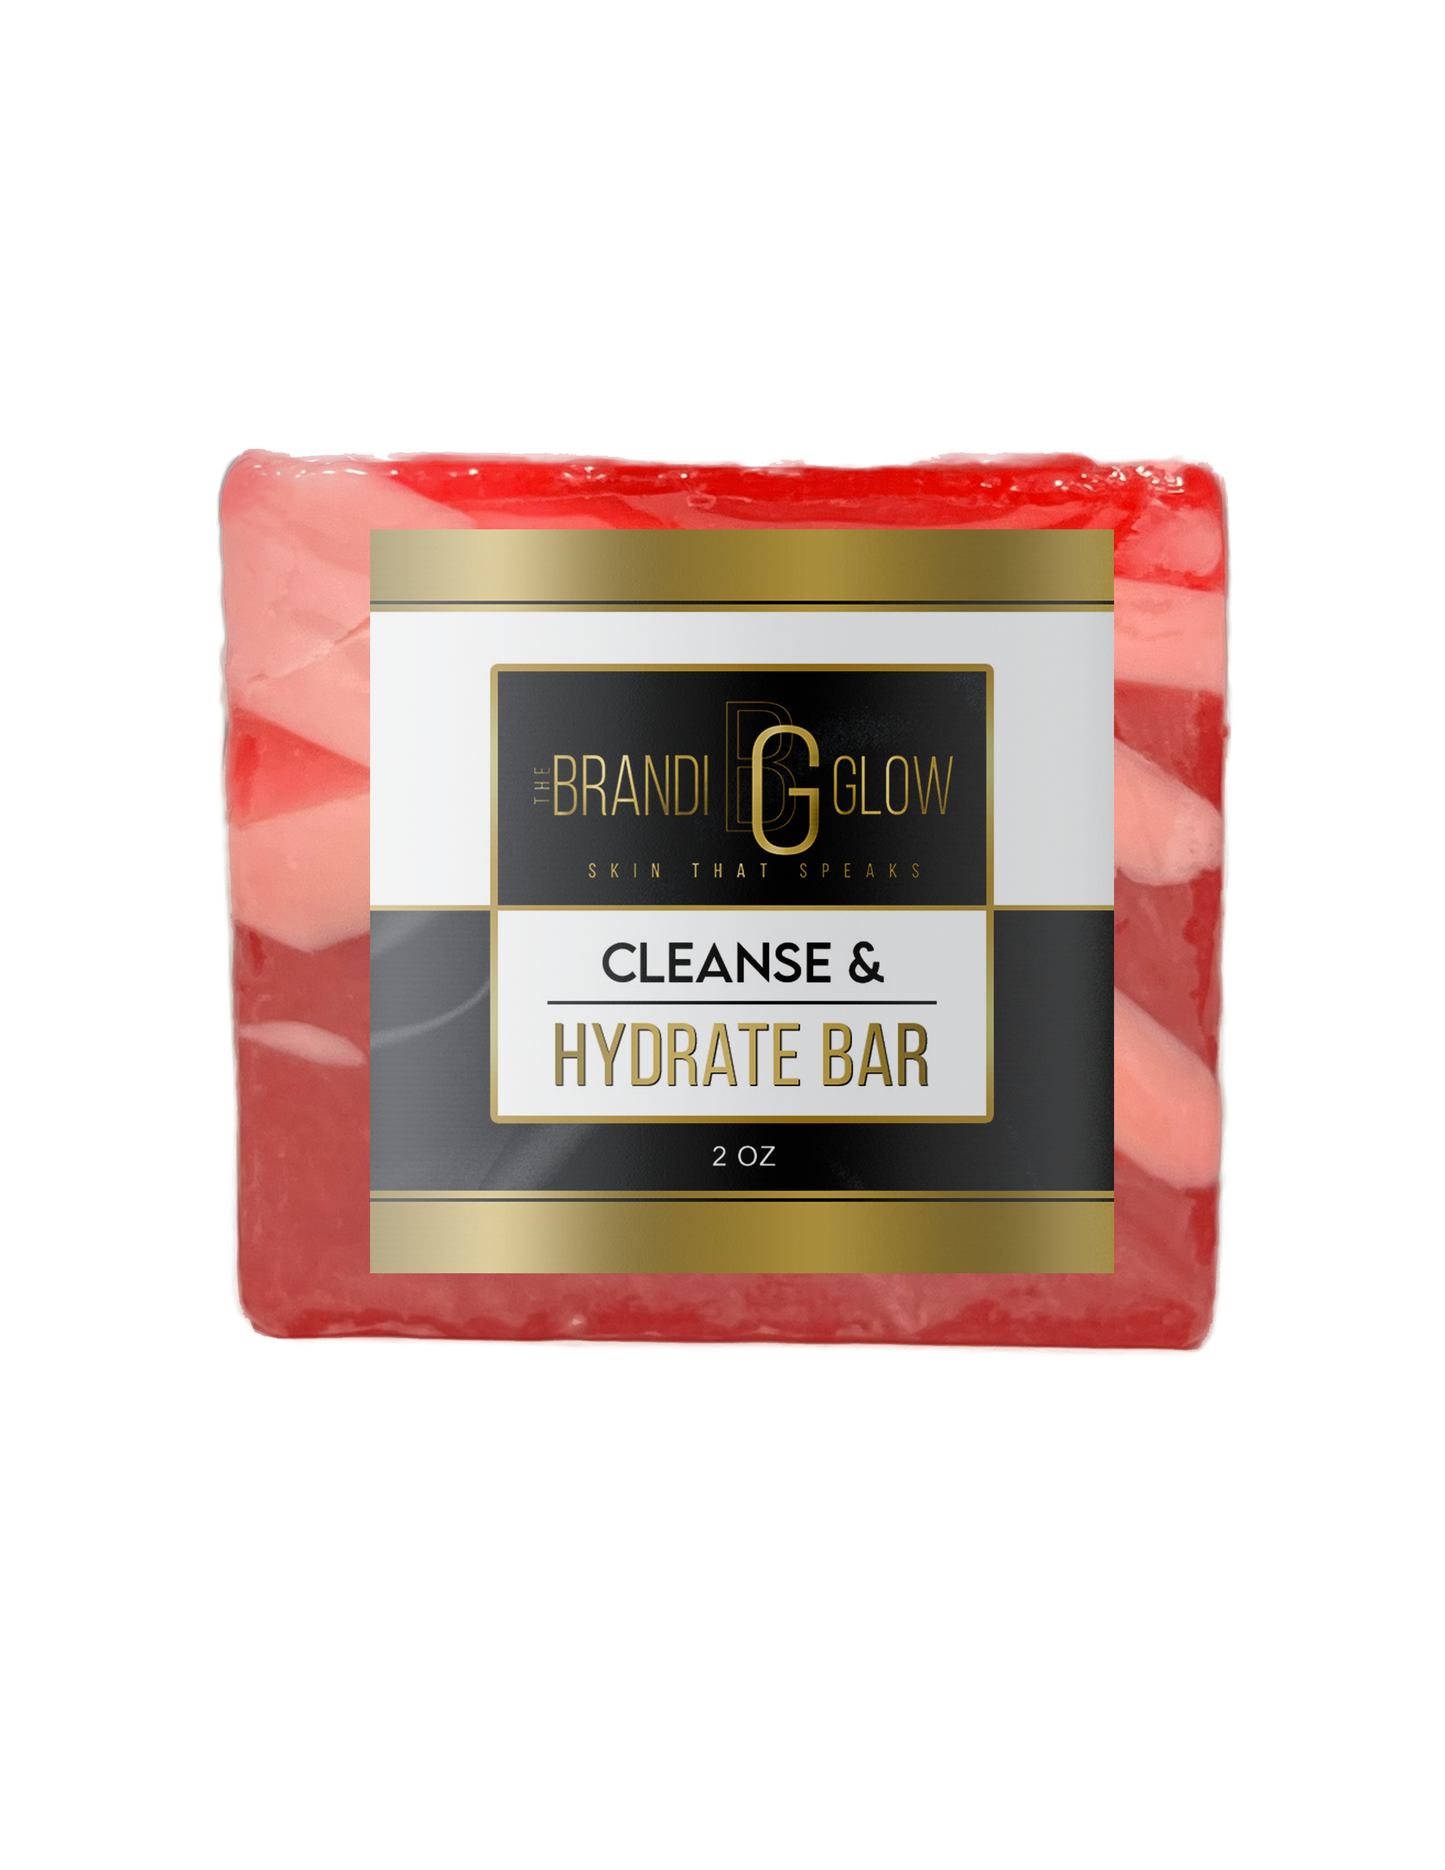 📣NEW Limited Edition Item📣 Cleanse & Hydrate Bar